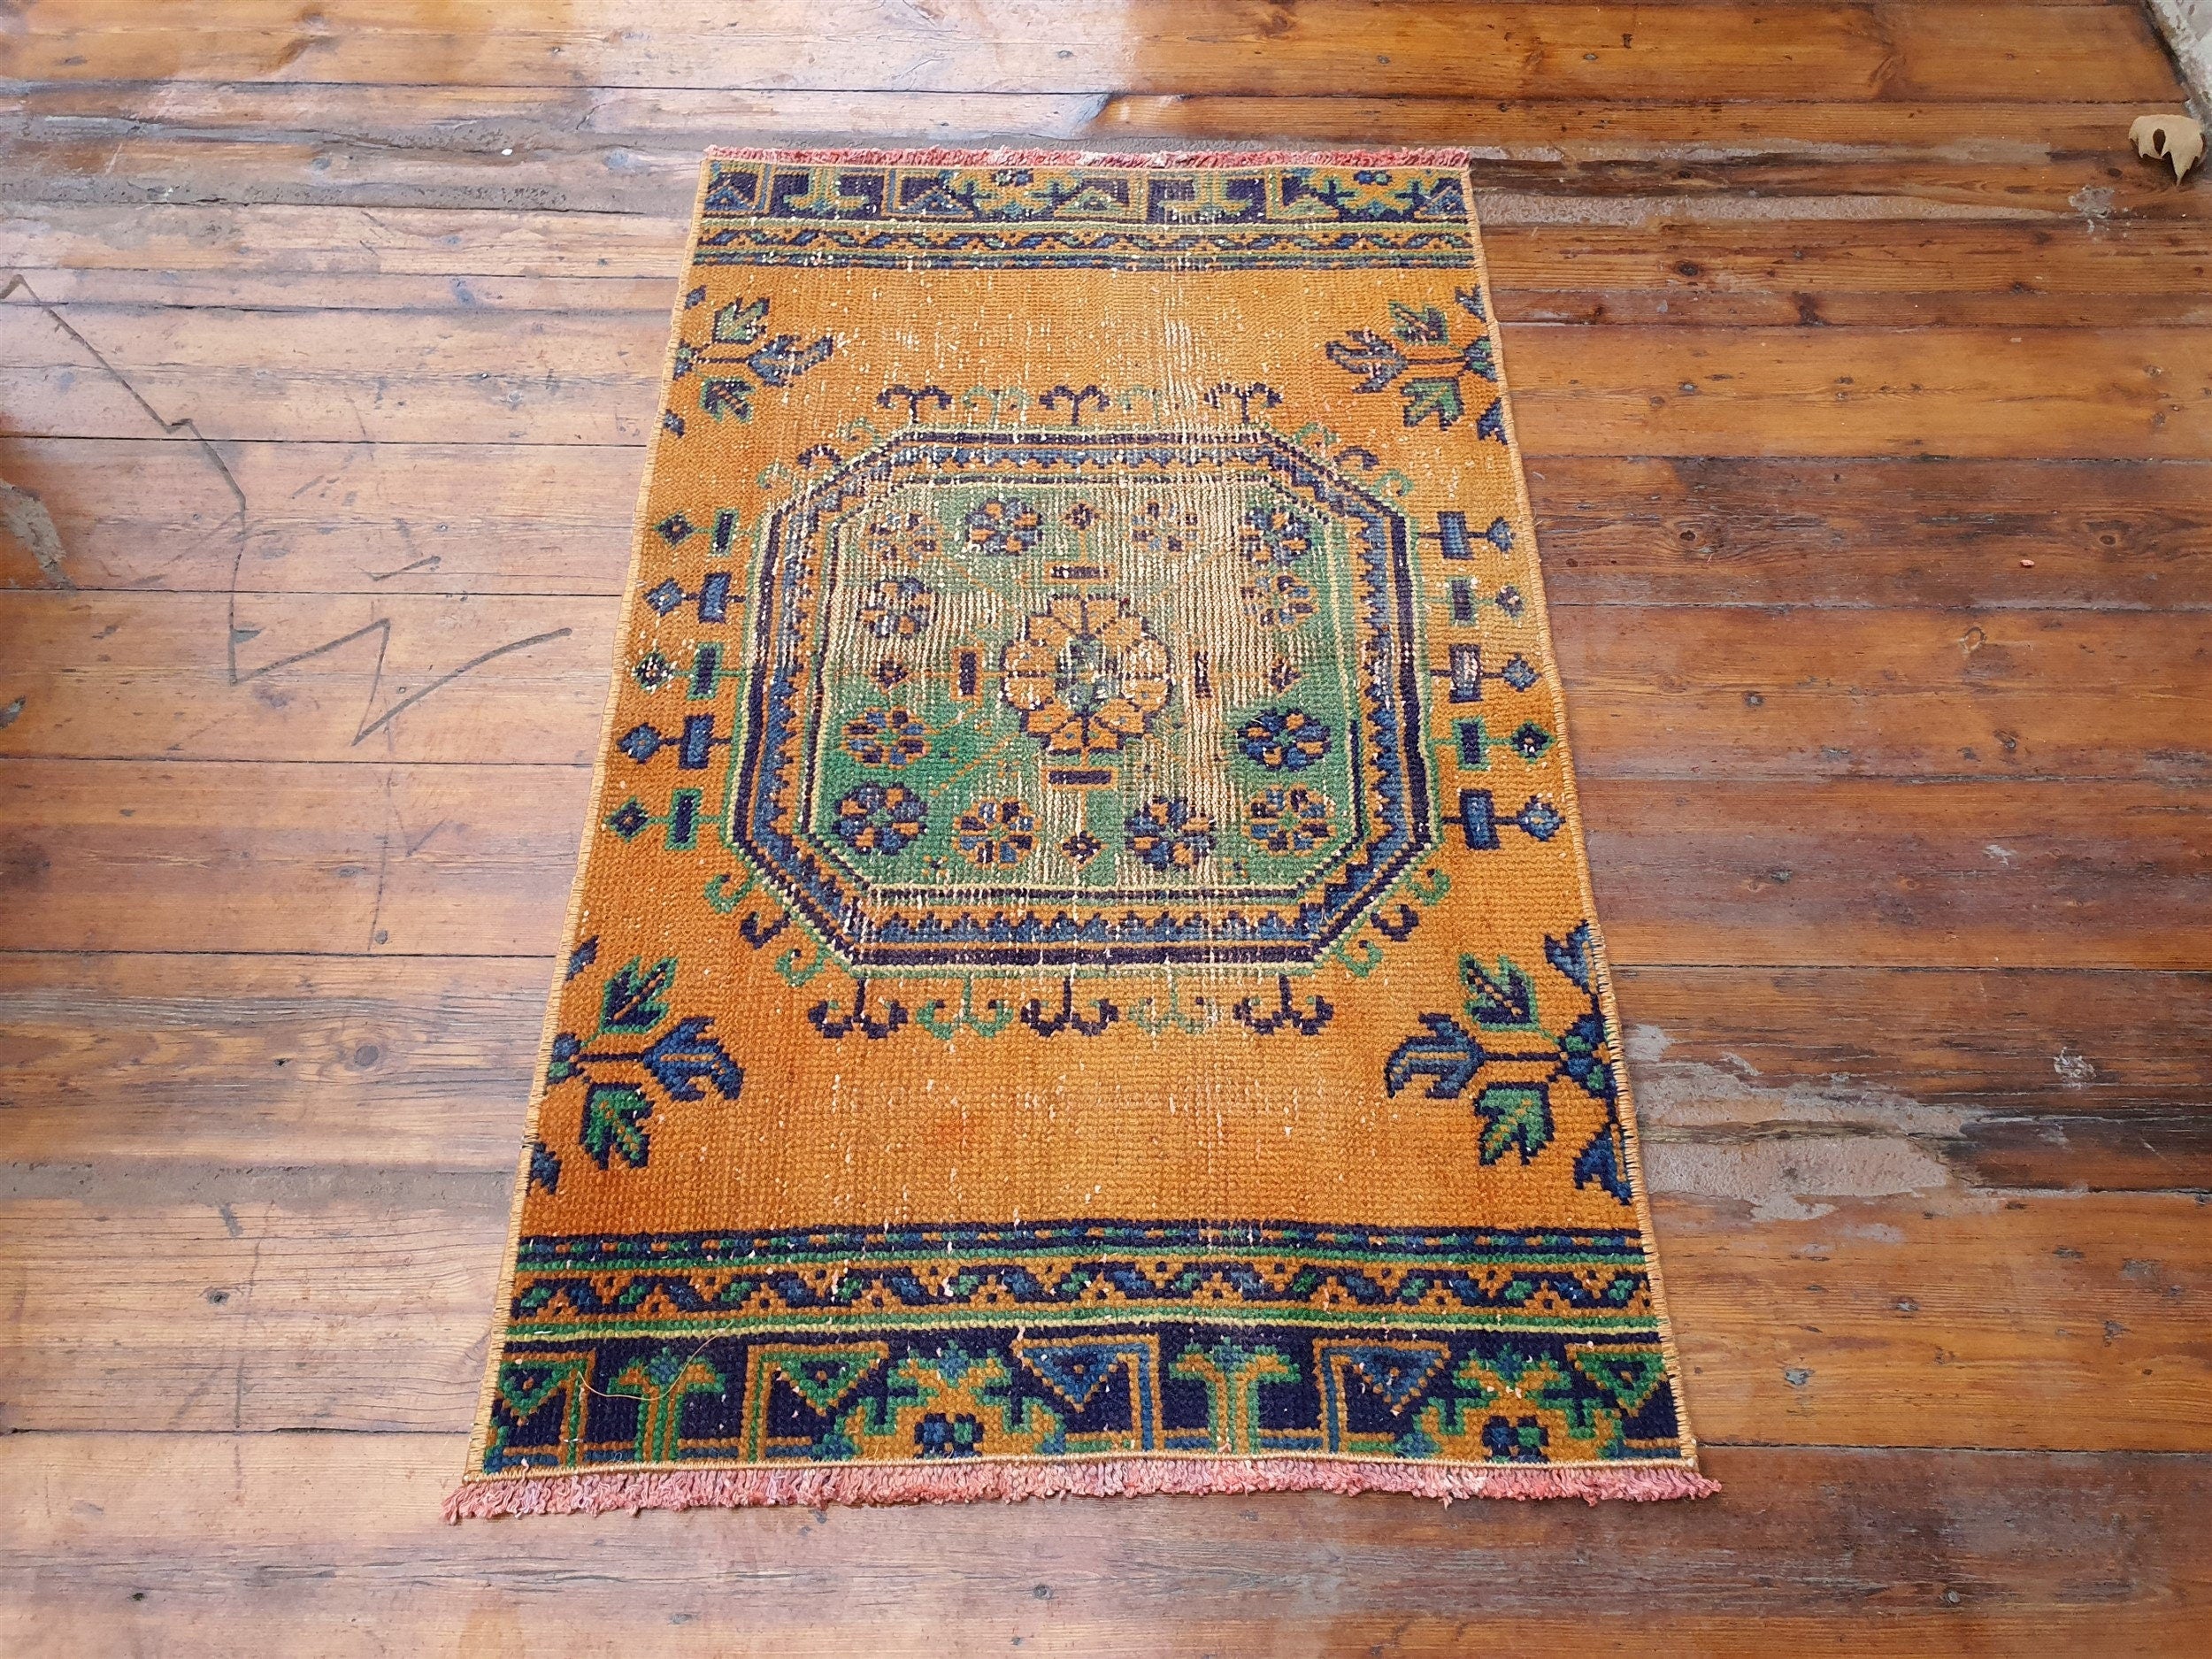 Small Turkish Rug, 3 ft 5 in x 2 ft 1 in, Apricot Orange and Teal Green / Grey Vintage Faded Distressed Door Mat